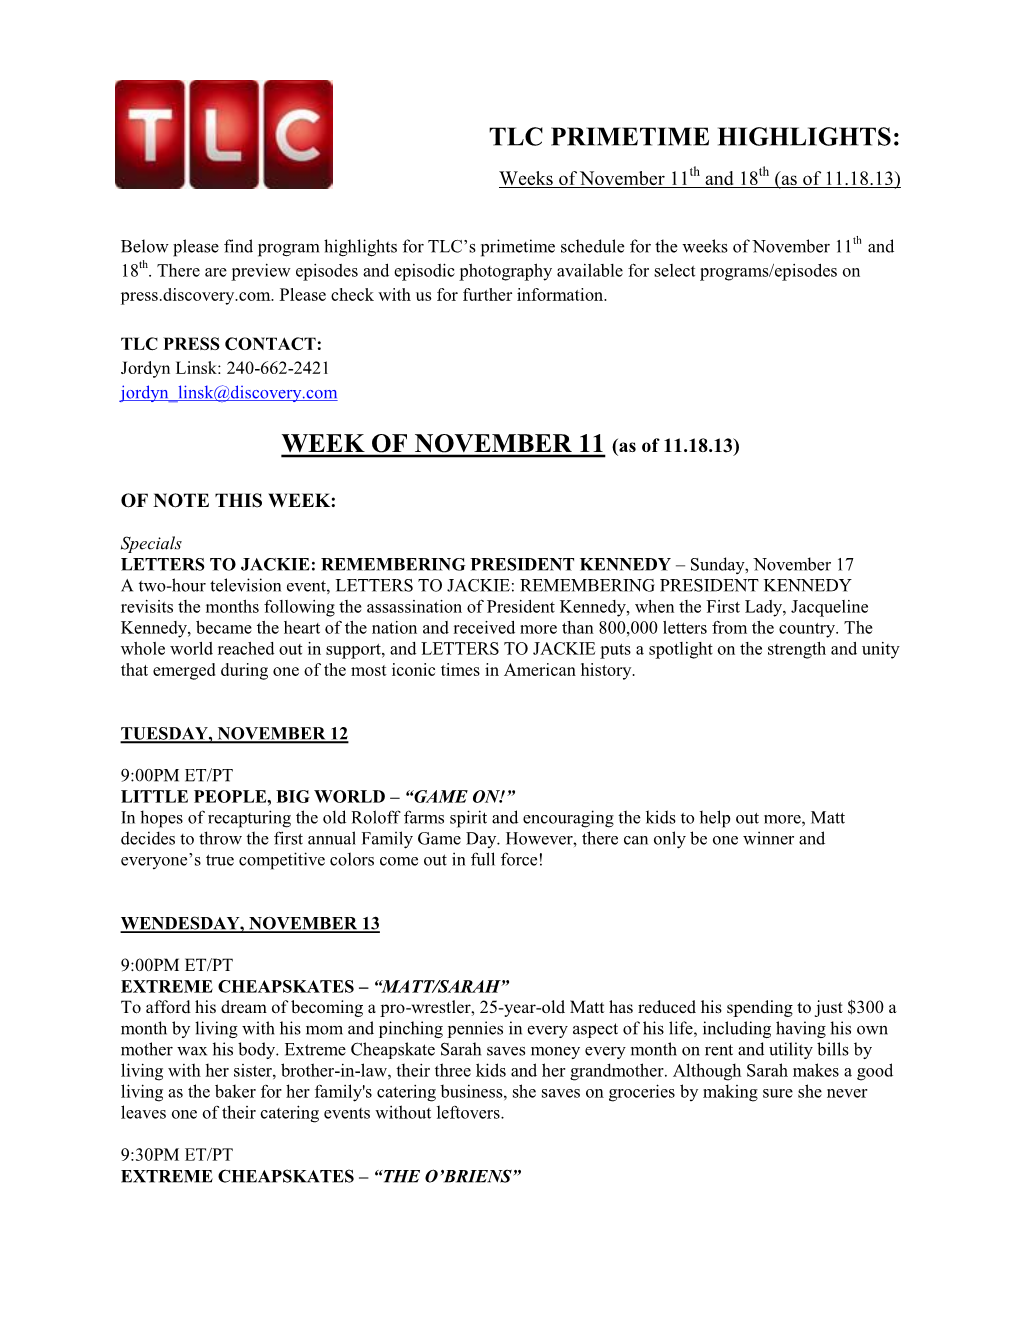 TLC PRIMETIME HIGHLIGHTS: Weeks of November 11Th and 18Th (As of 11.18.13)